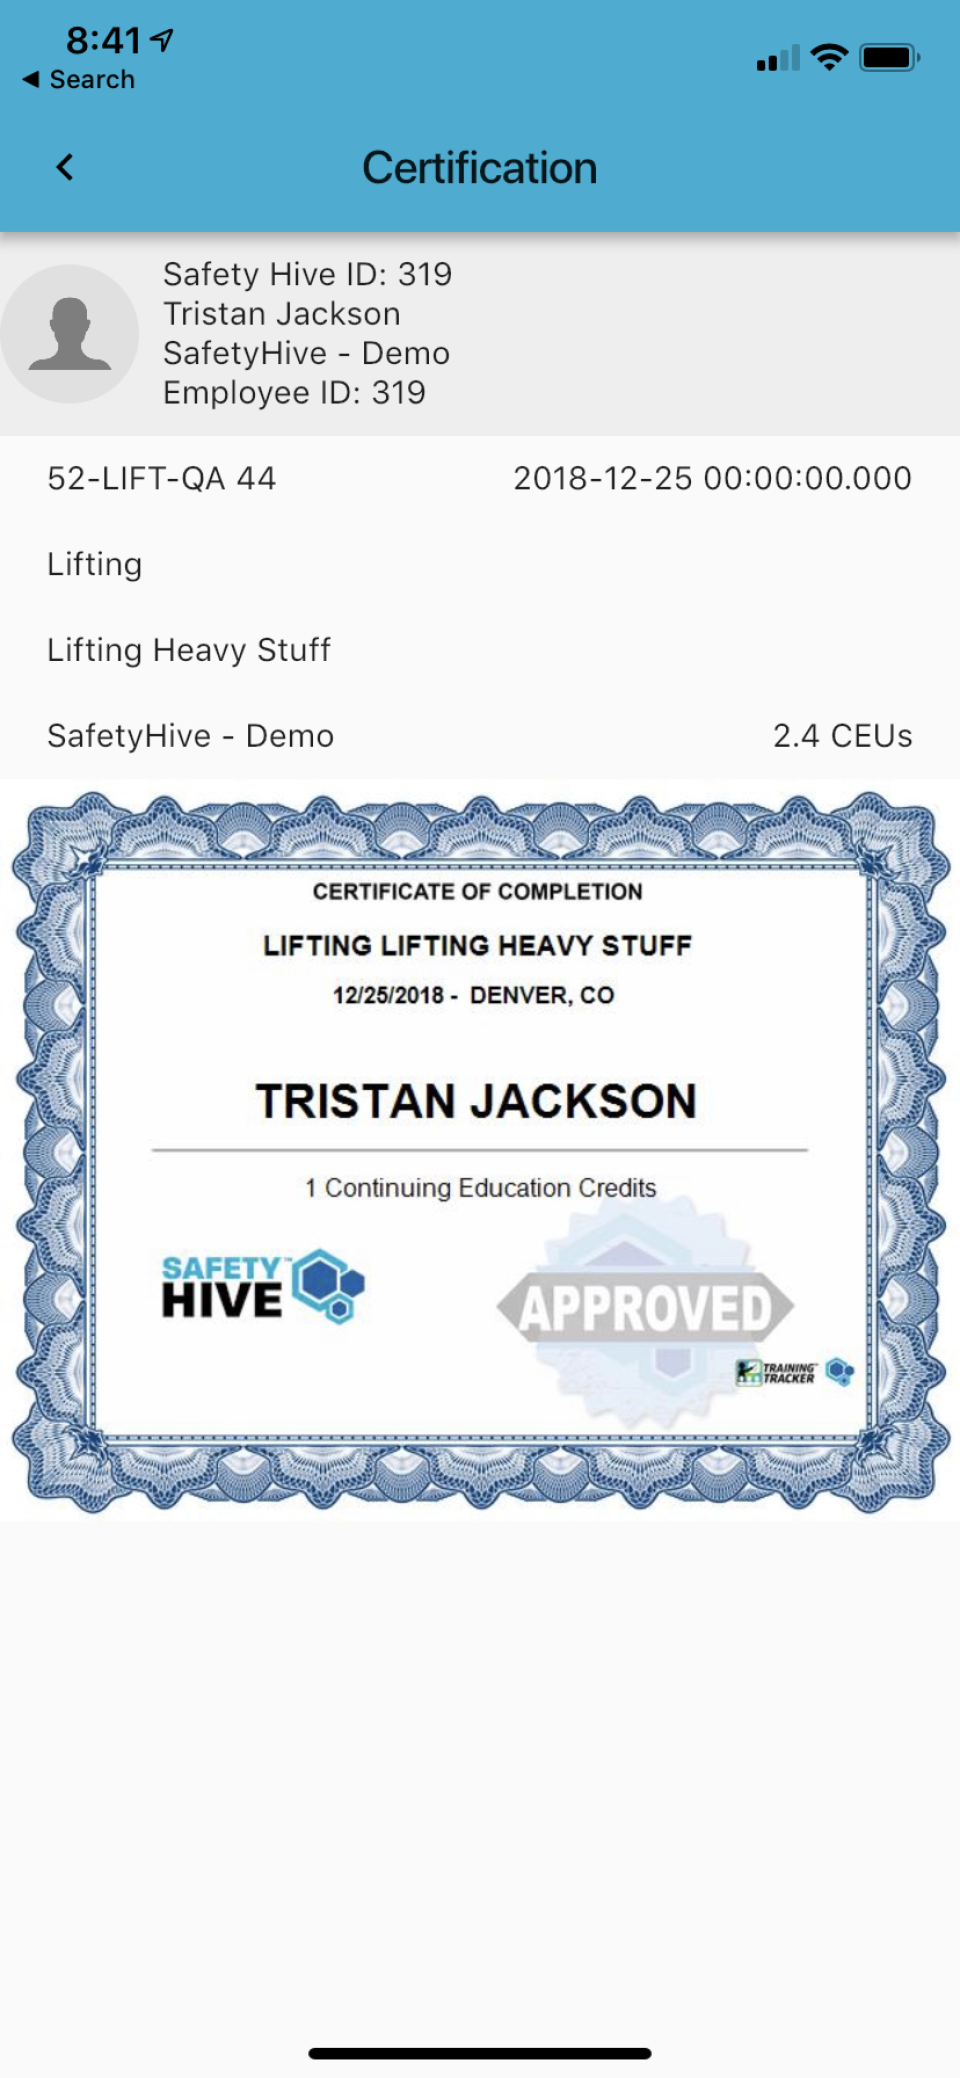 Safety Hive Suite Software - The solution comes with in-built certifications that allow users to access history and upcoming certifications